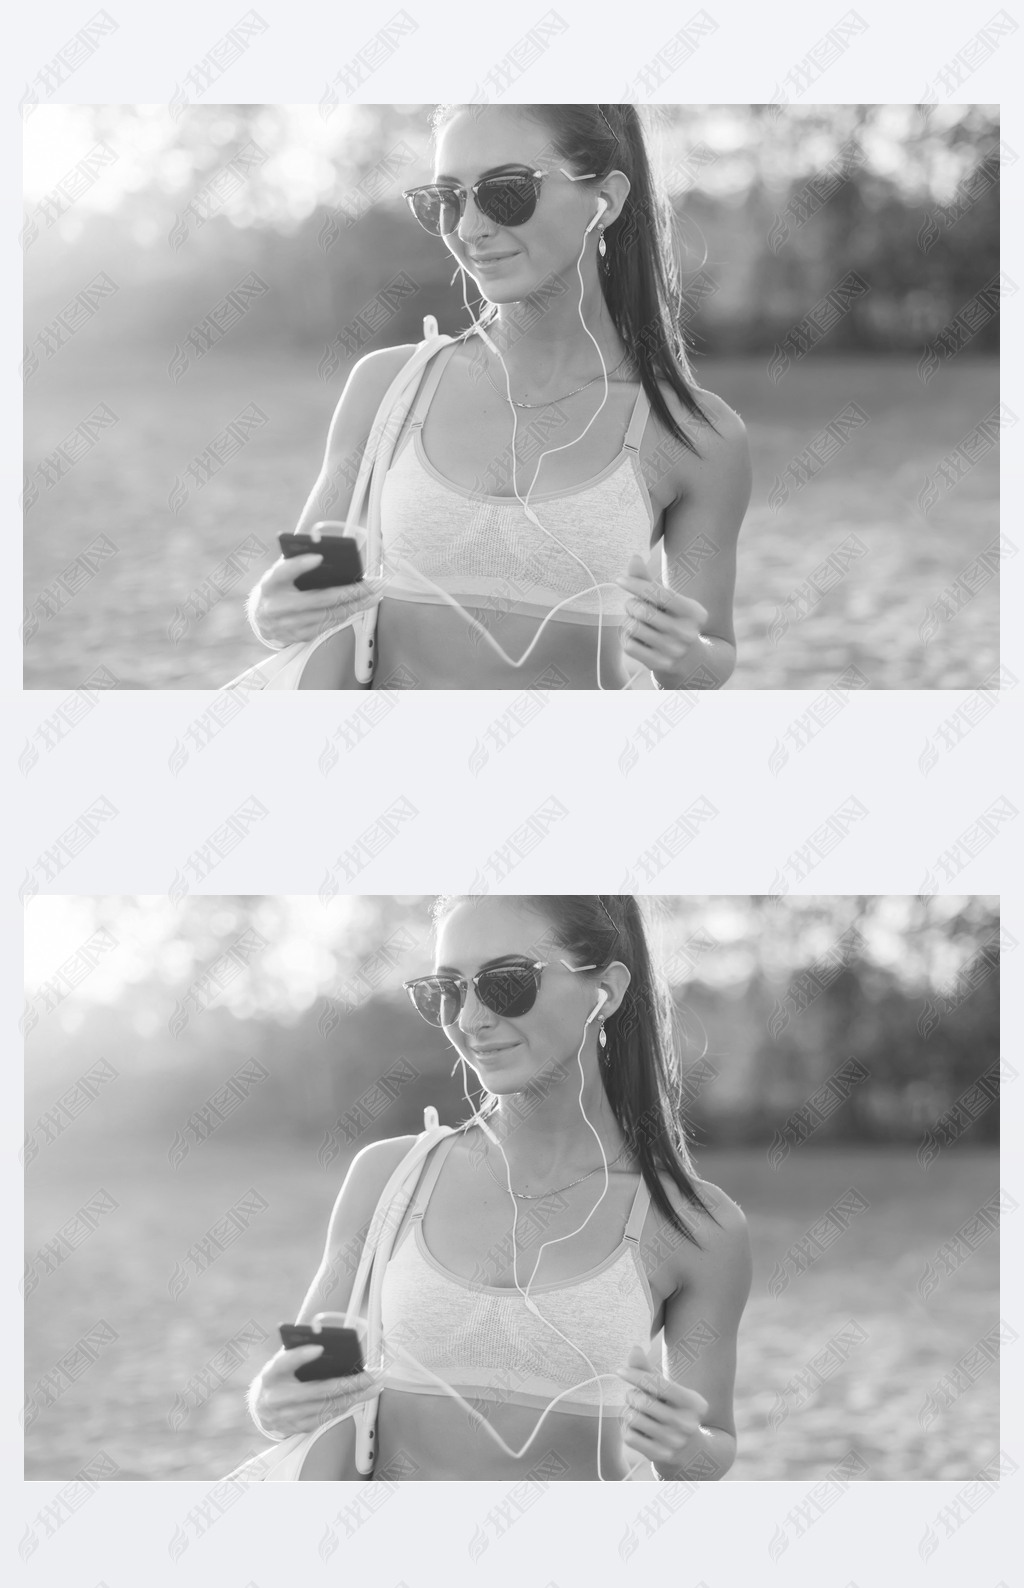 Black and white Athlete woman listening music looking at artphone after workout in nature outdoors